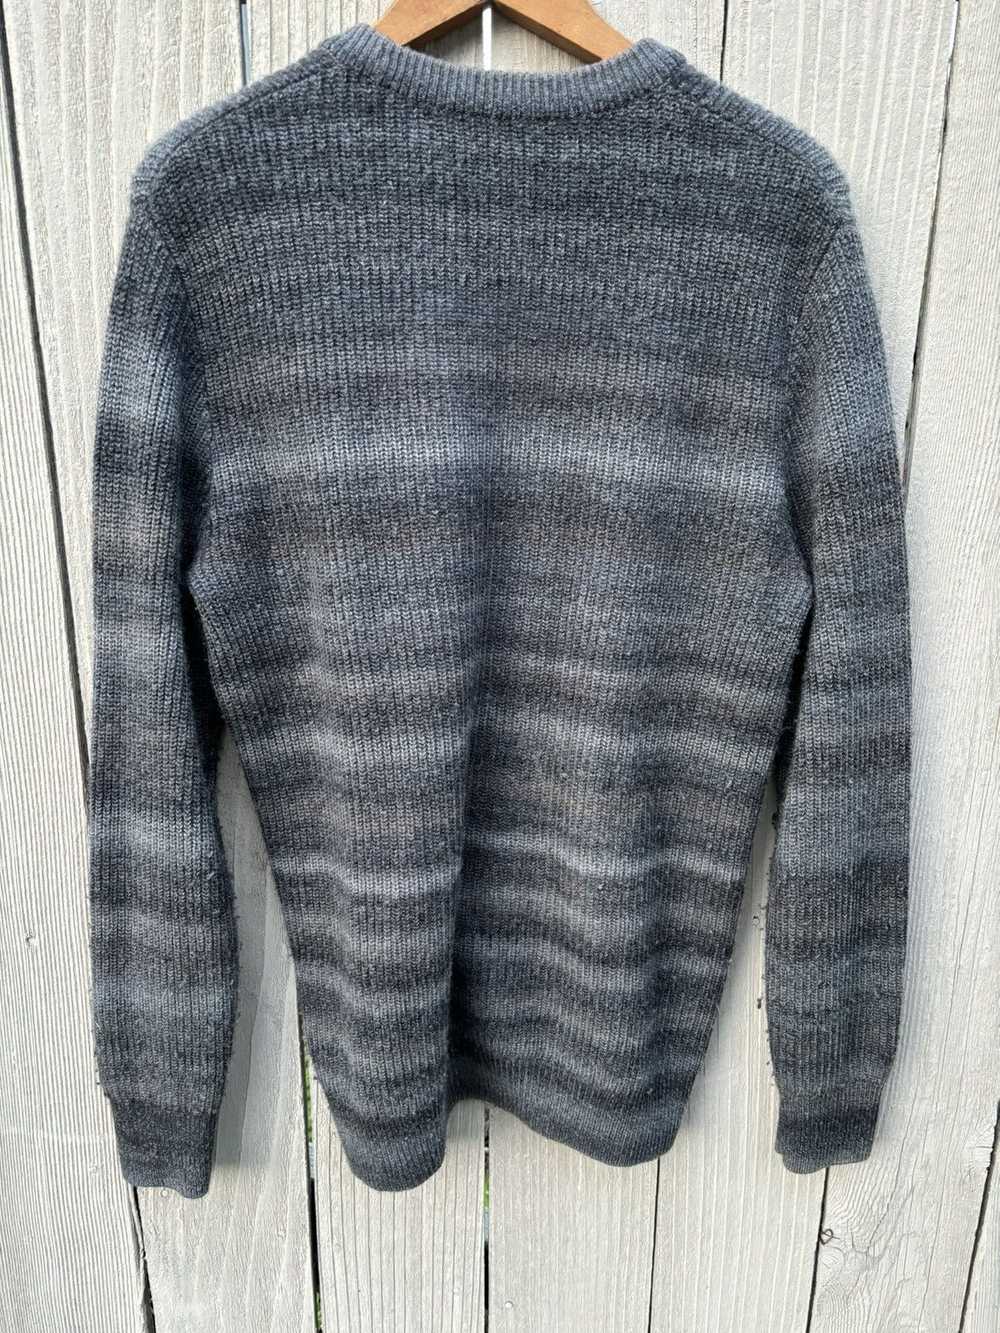 Vince Grey Striped Cashmere Blend Sweater - image 2